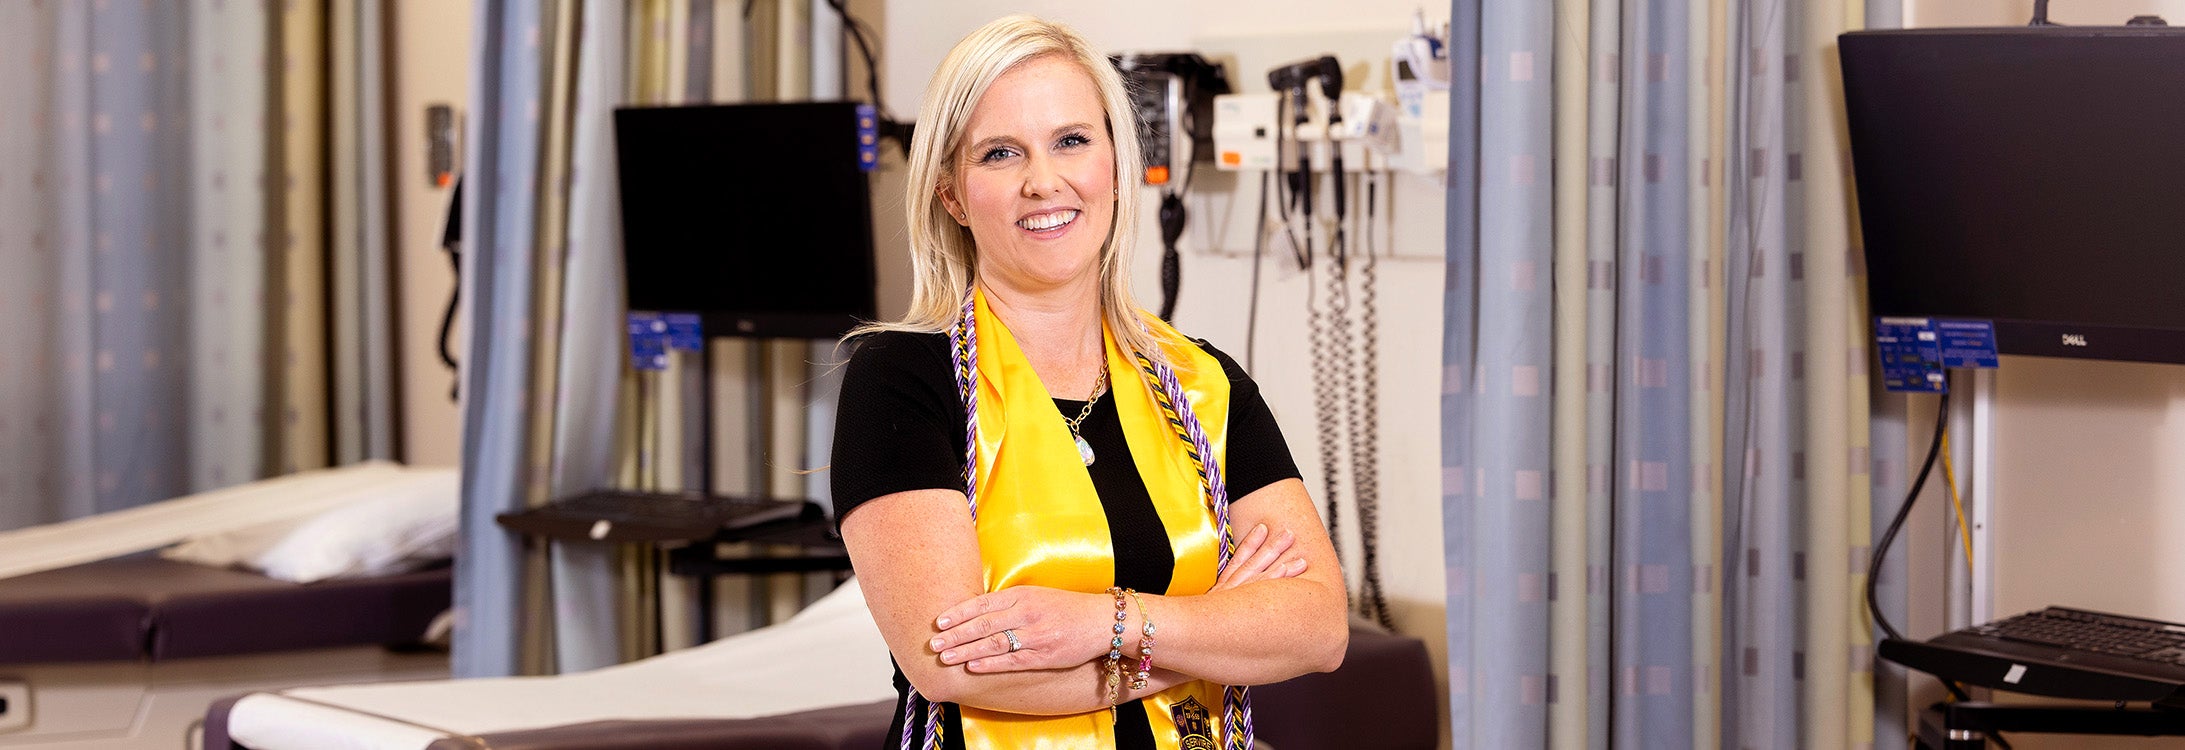 ECU Psychiatric Mental Health Nurse Practitioner graduate Karmen Harris is working to create opportunities for nurses in forensic care for victims of crime and abuse. (Photos by Rhett Butler)